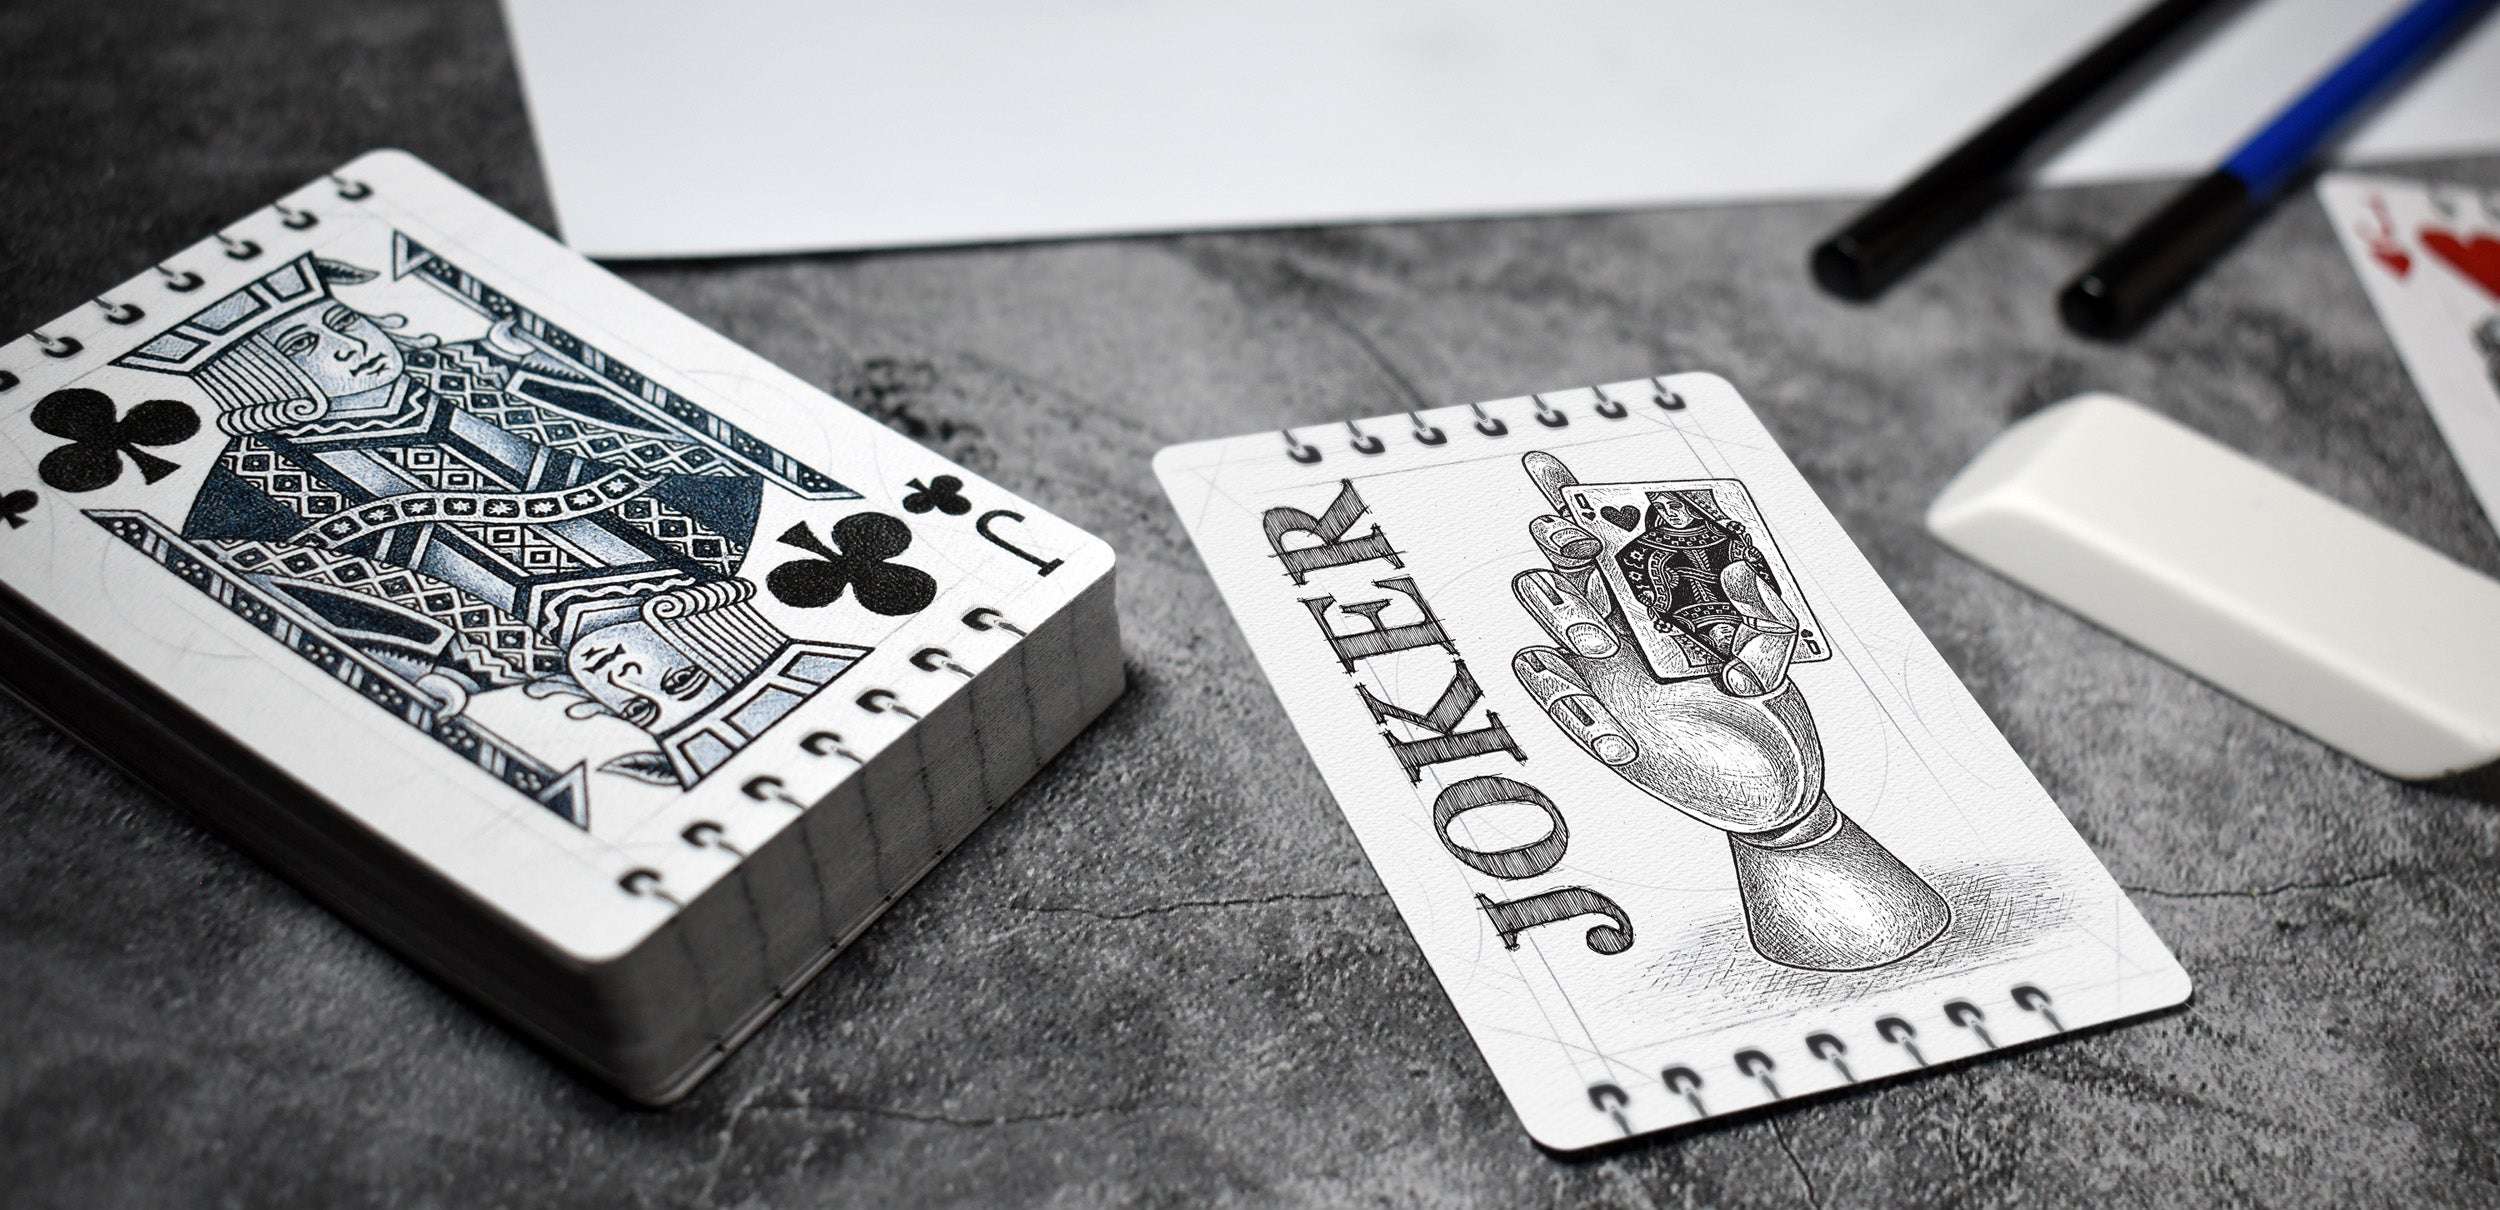 Poker Card Drawings  Card drawing Poker chips Card tattoo